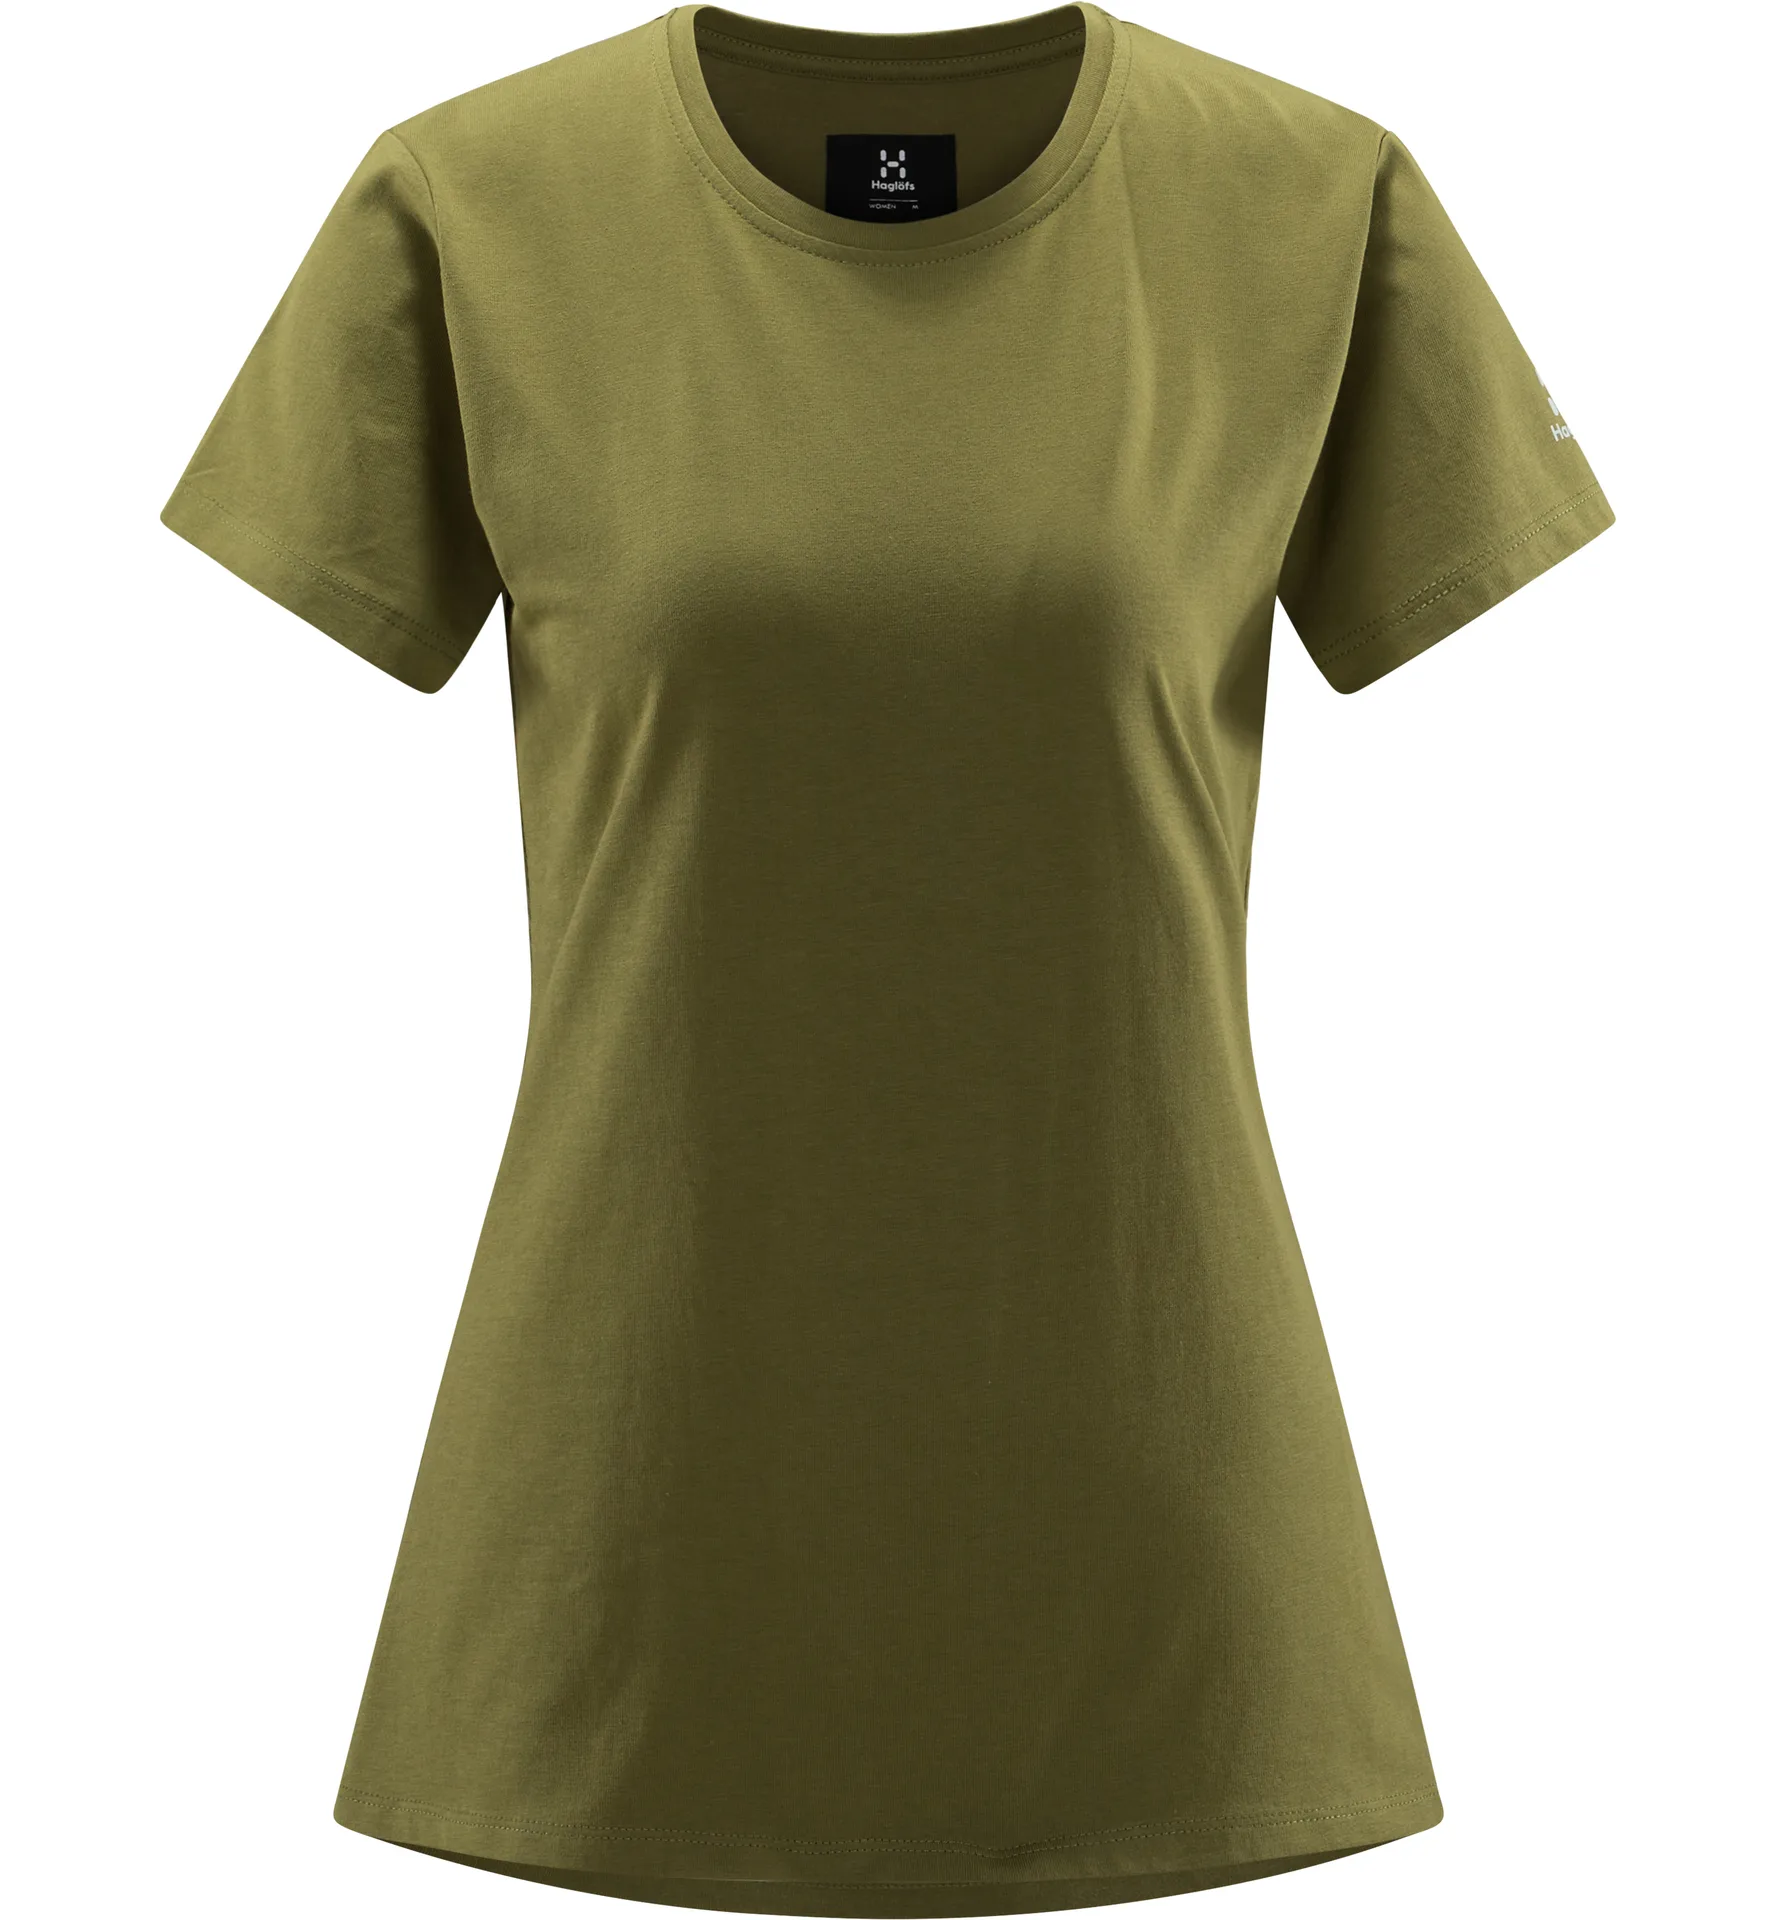 Haglöfs Outsider By Nature Tee Women – Olive Green